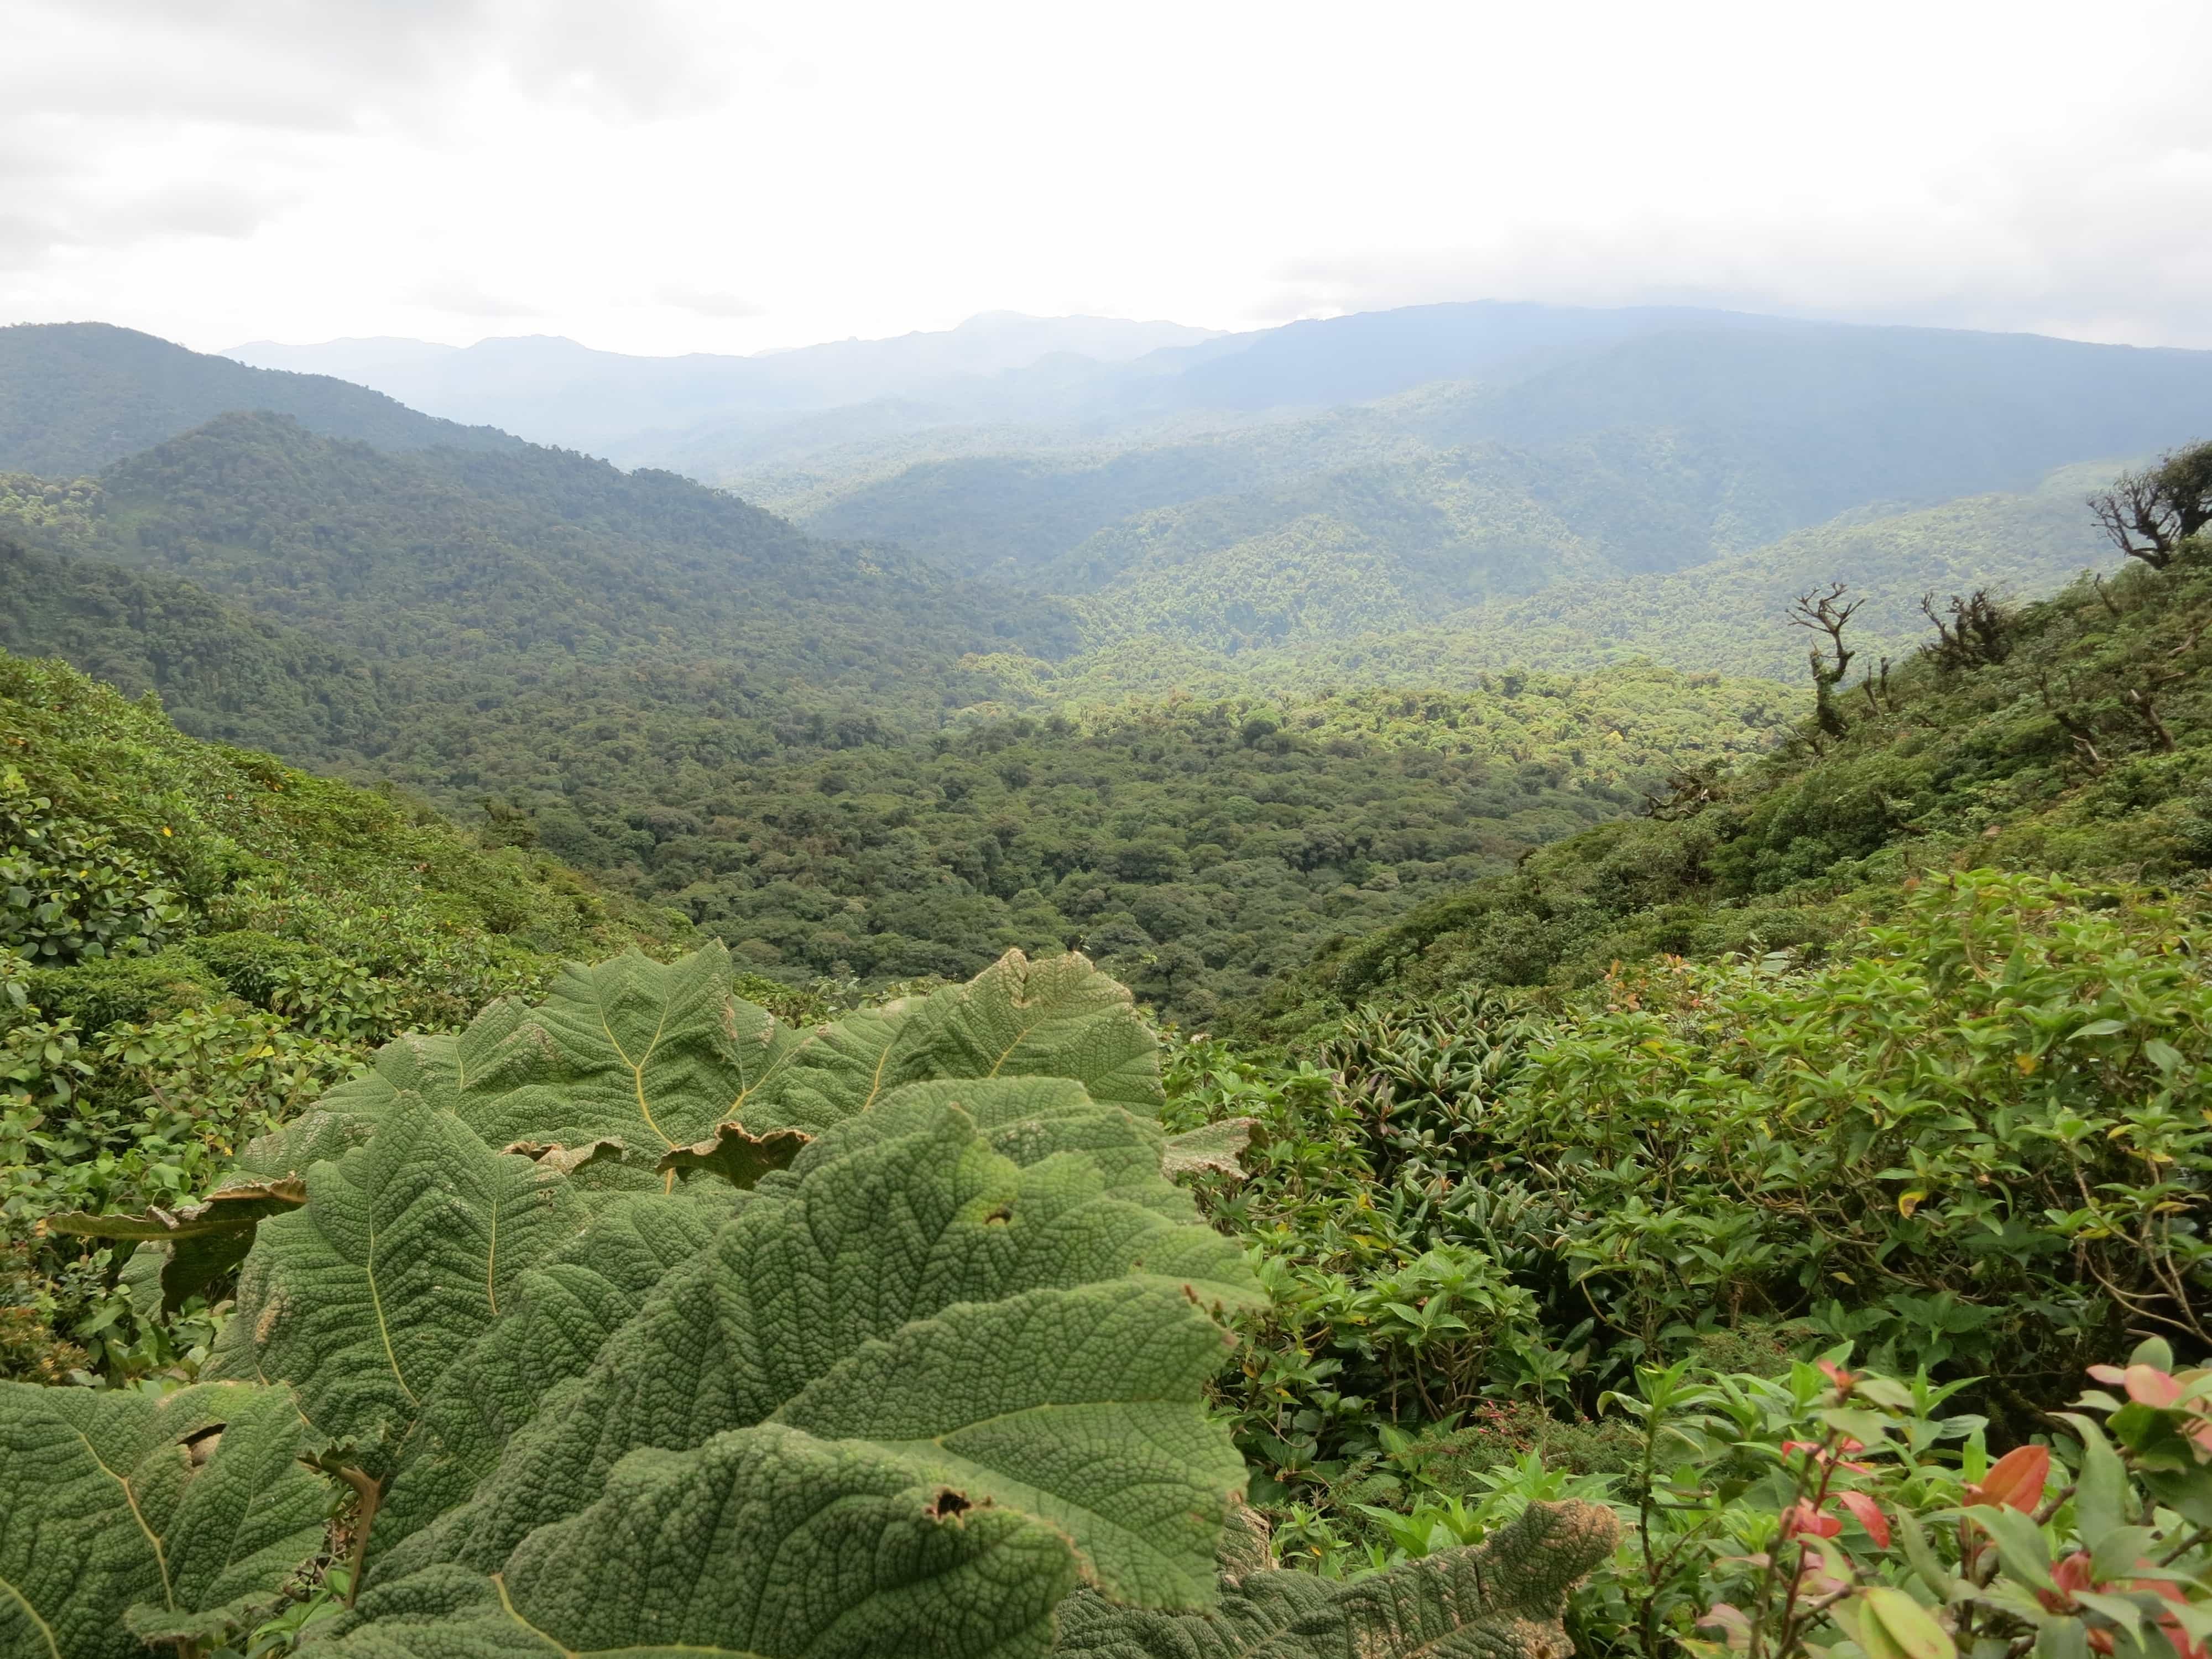 Hiking Montaverde Cloud Forest is one of the most popular things to do in Costa Rica. 